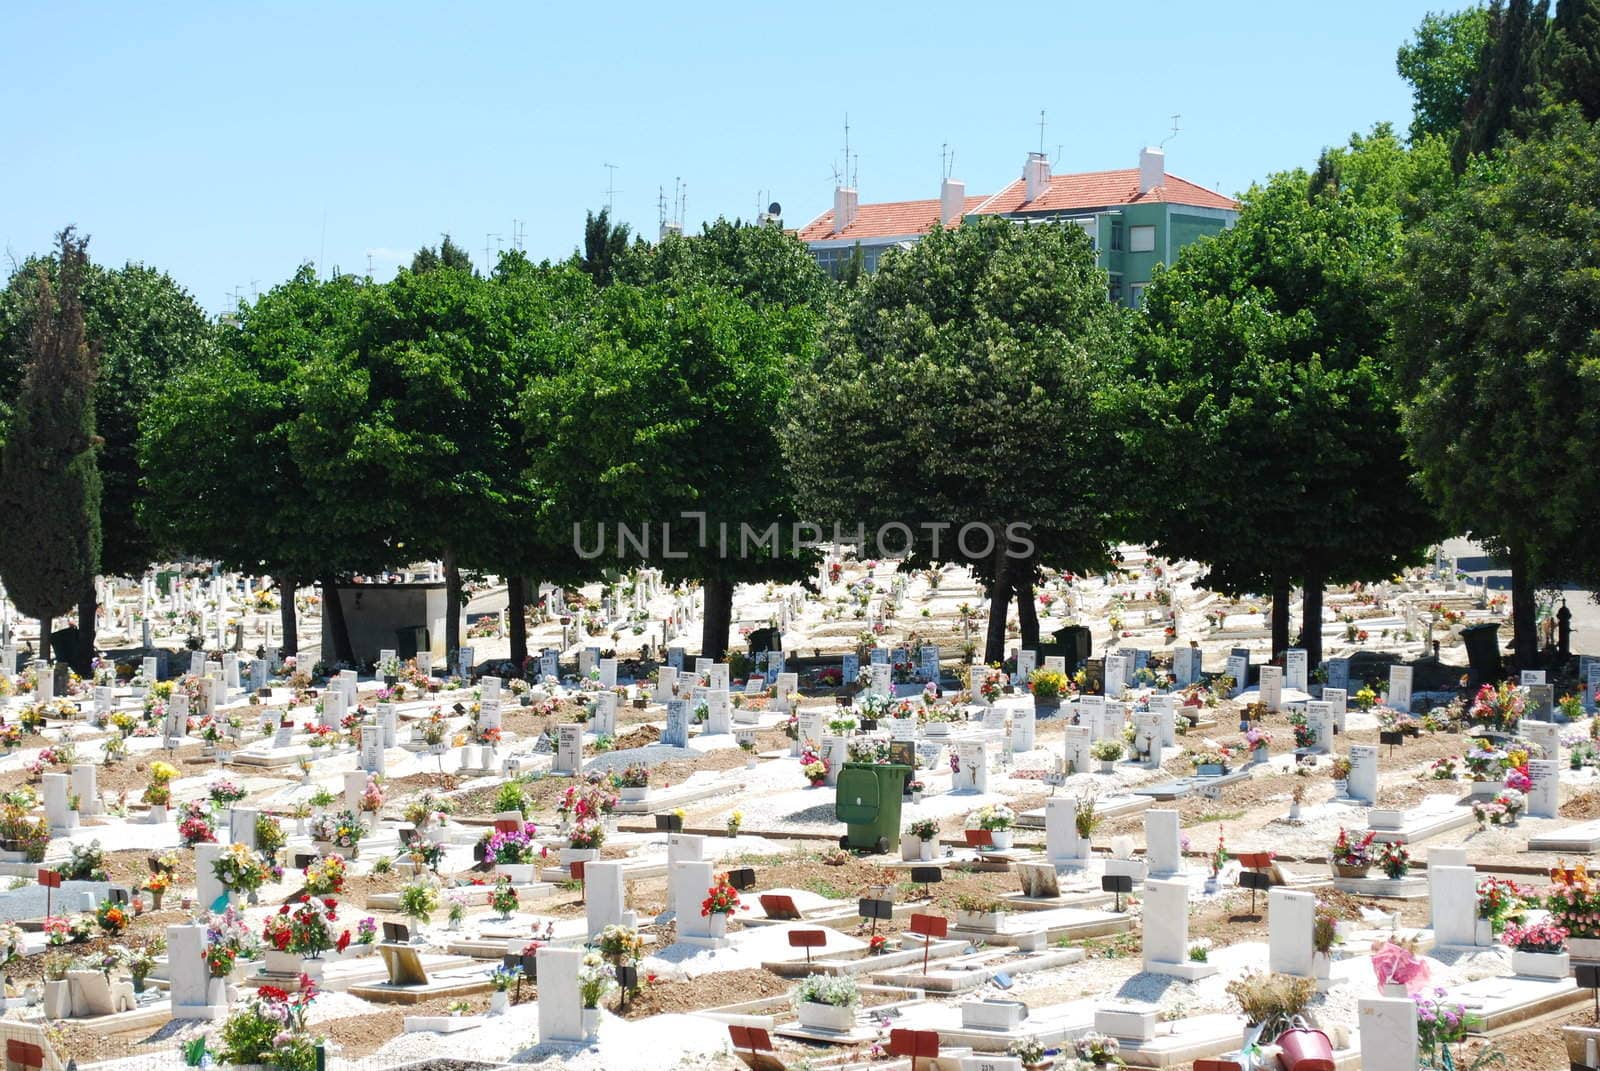 photo of a urban cemetery full of trees and flowers